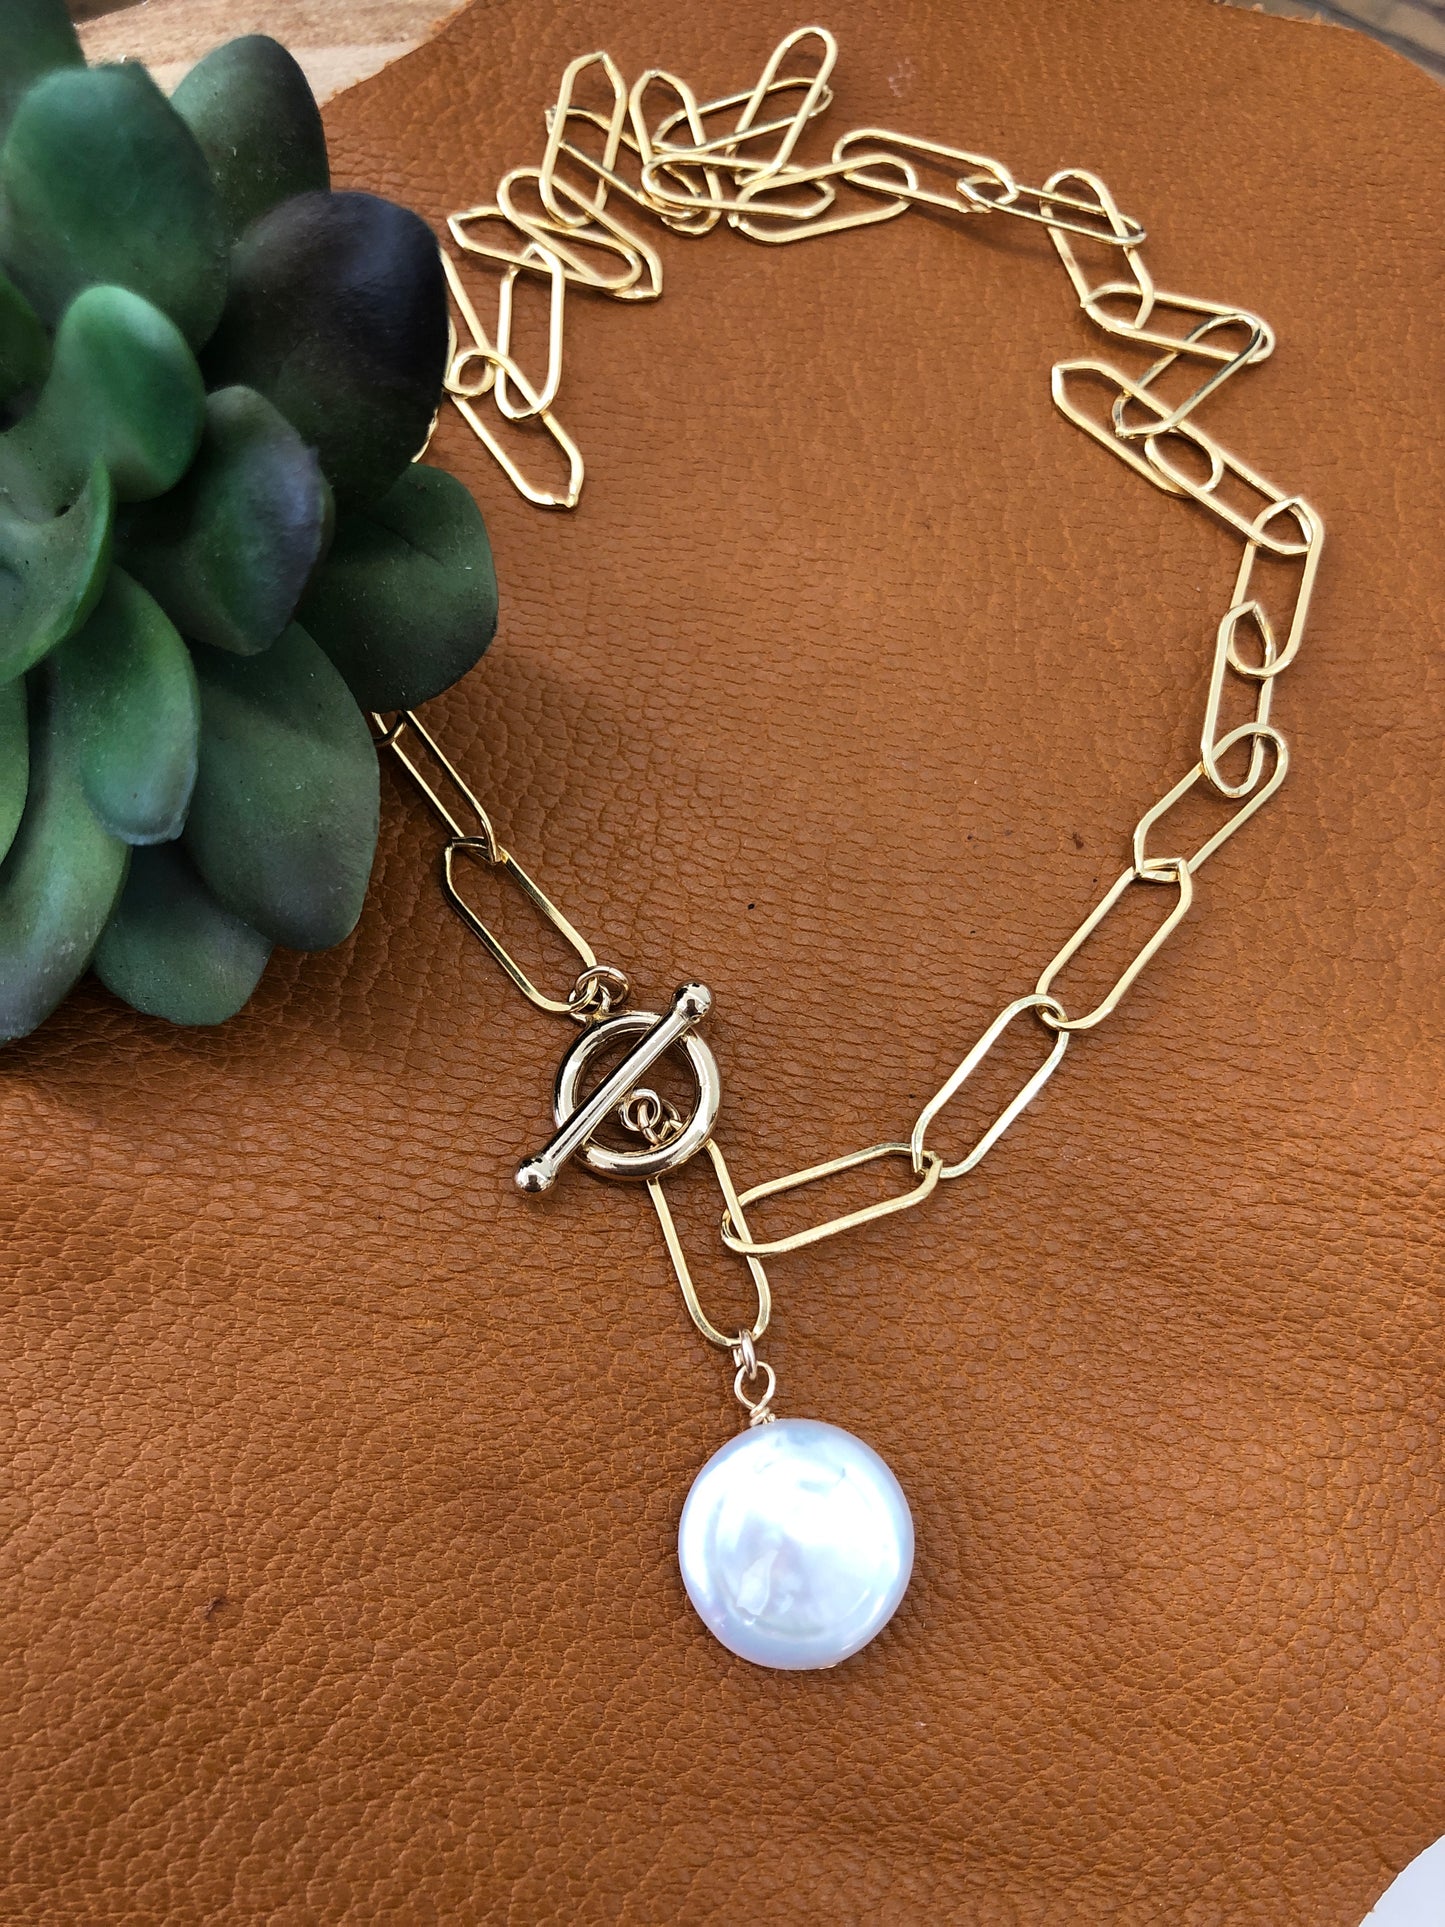 A 14k gold filled large paper clip necklace with fresh water coin pearl and toggle lays on a brown leather piece with a faux succulent sitting on the top left corner of the image.